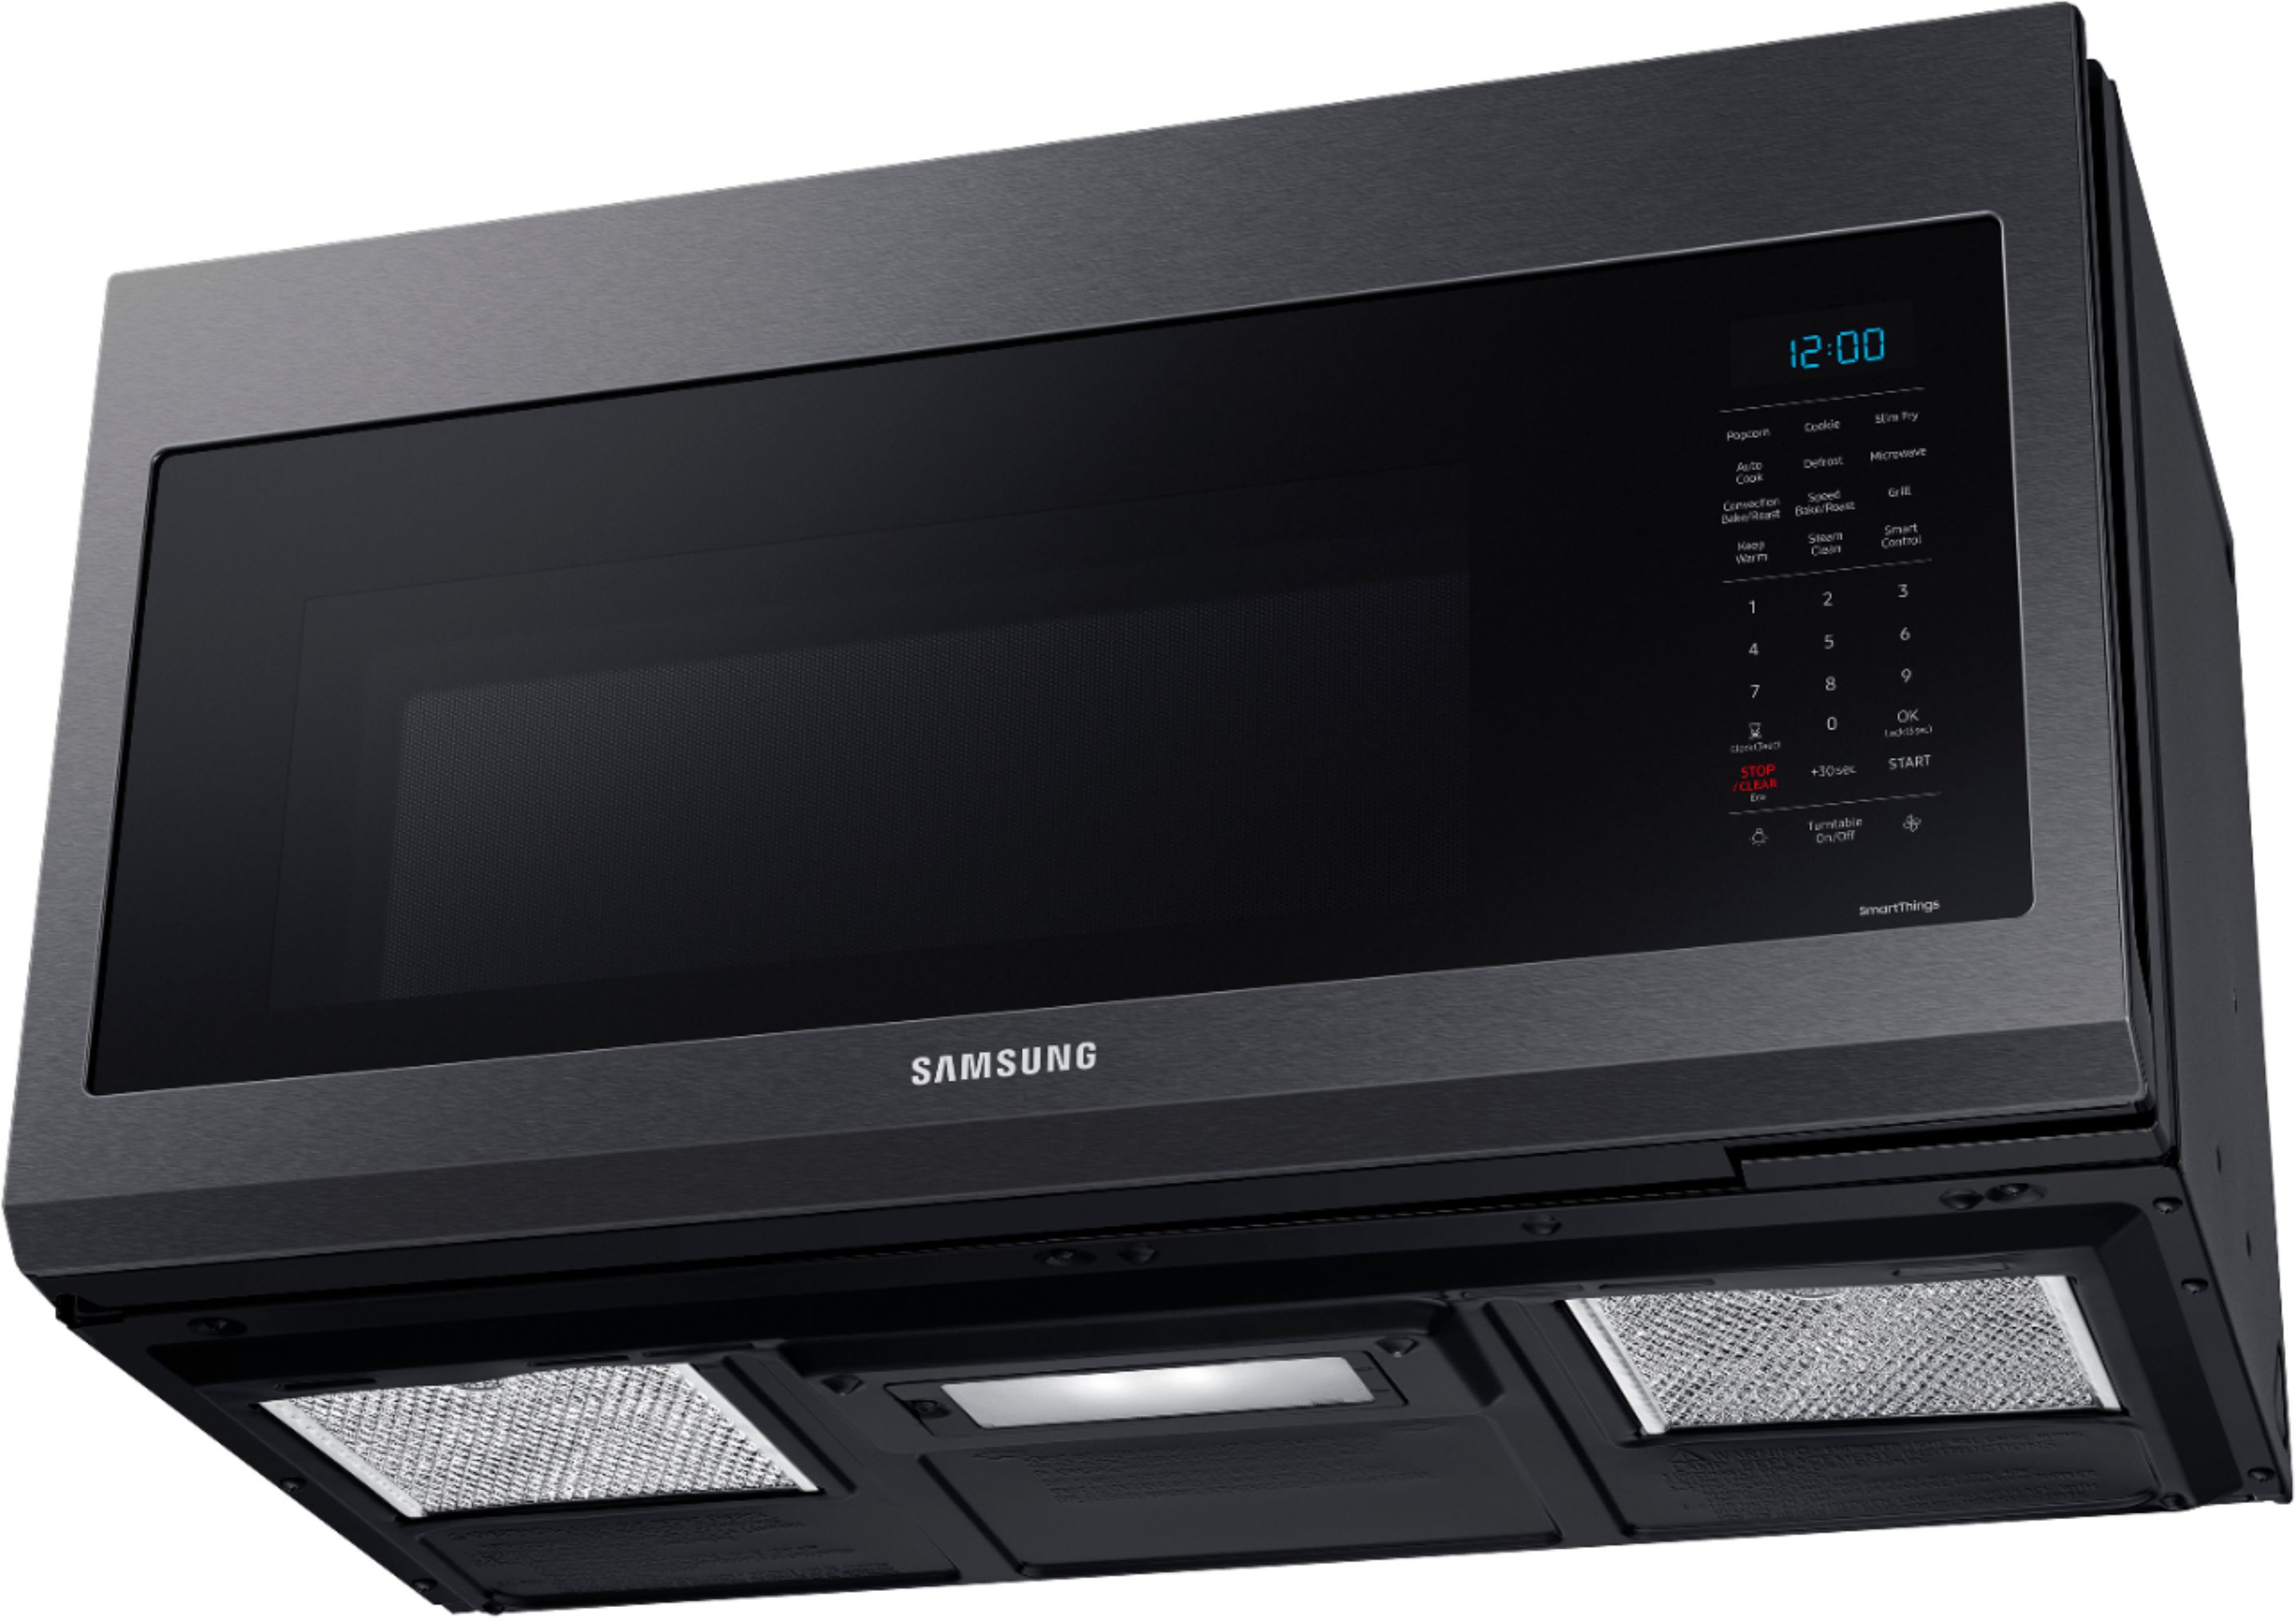 MC17T8000CS by Samsung - 1.7 cu ft. Smart Over-the-Range Microwave with  Convection & Slim Fry™ in Stainless Steel